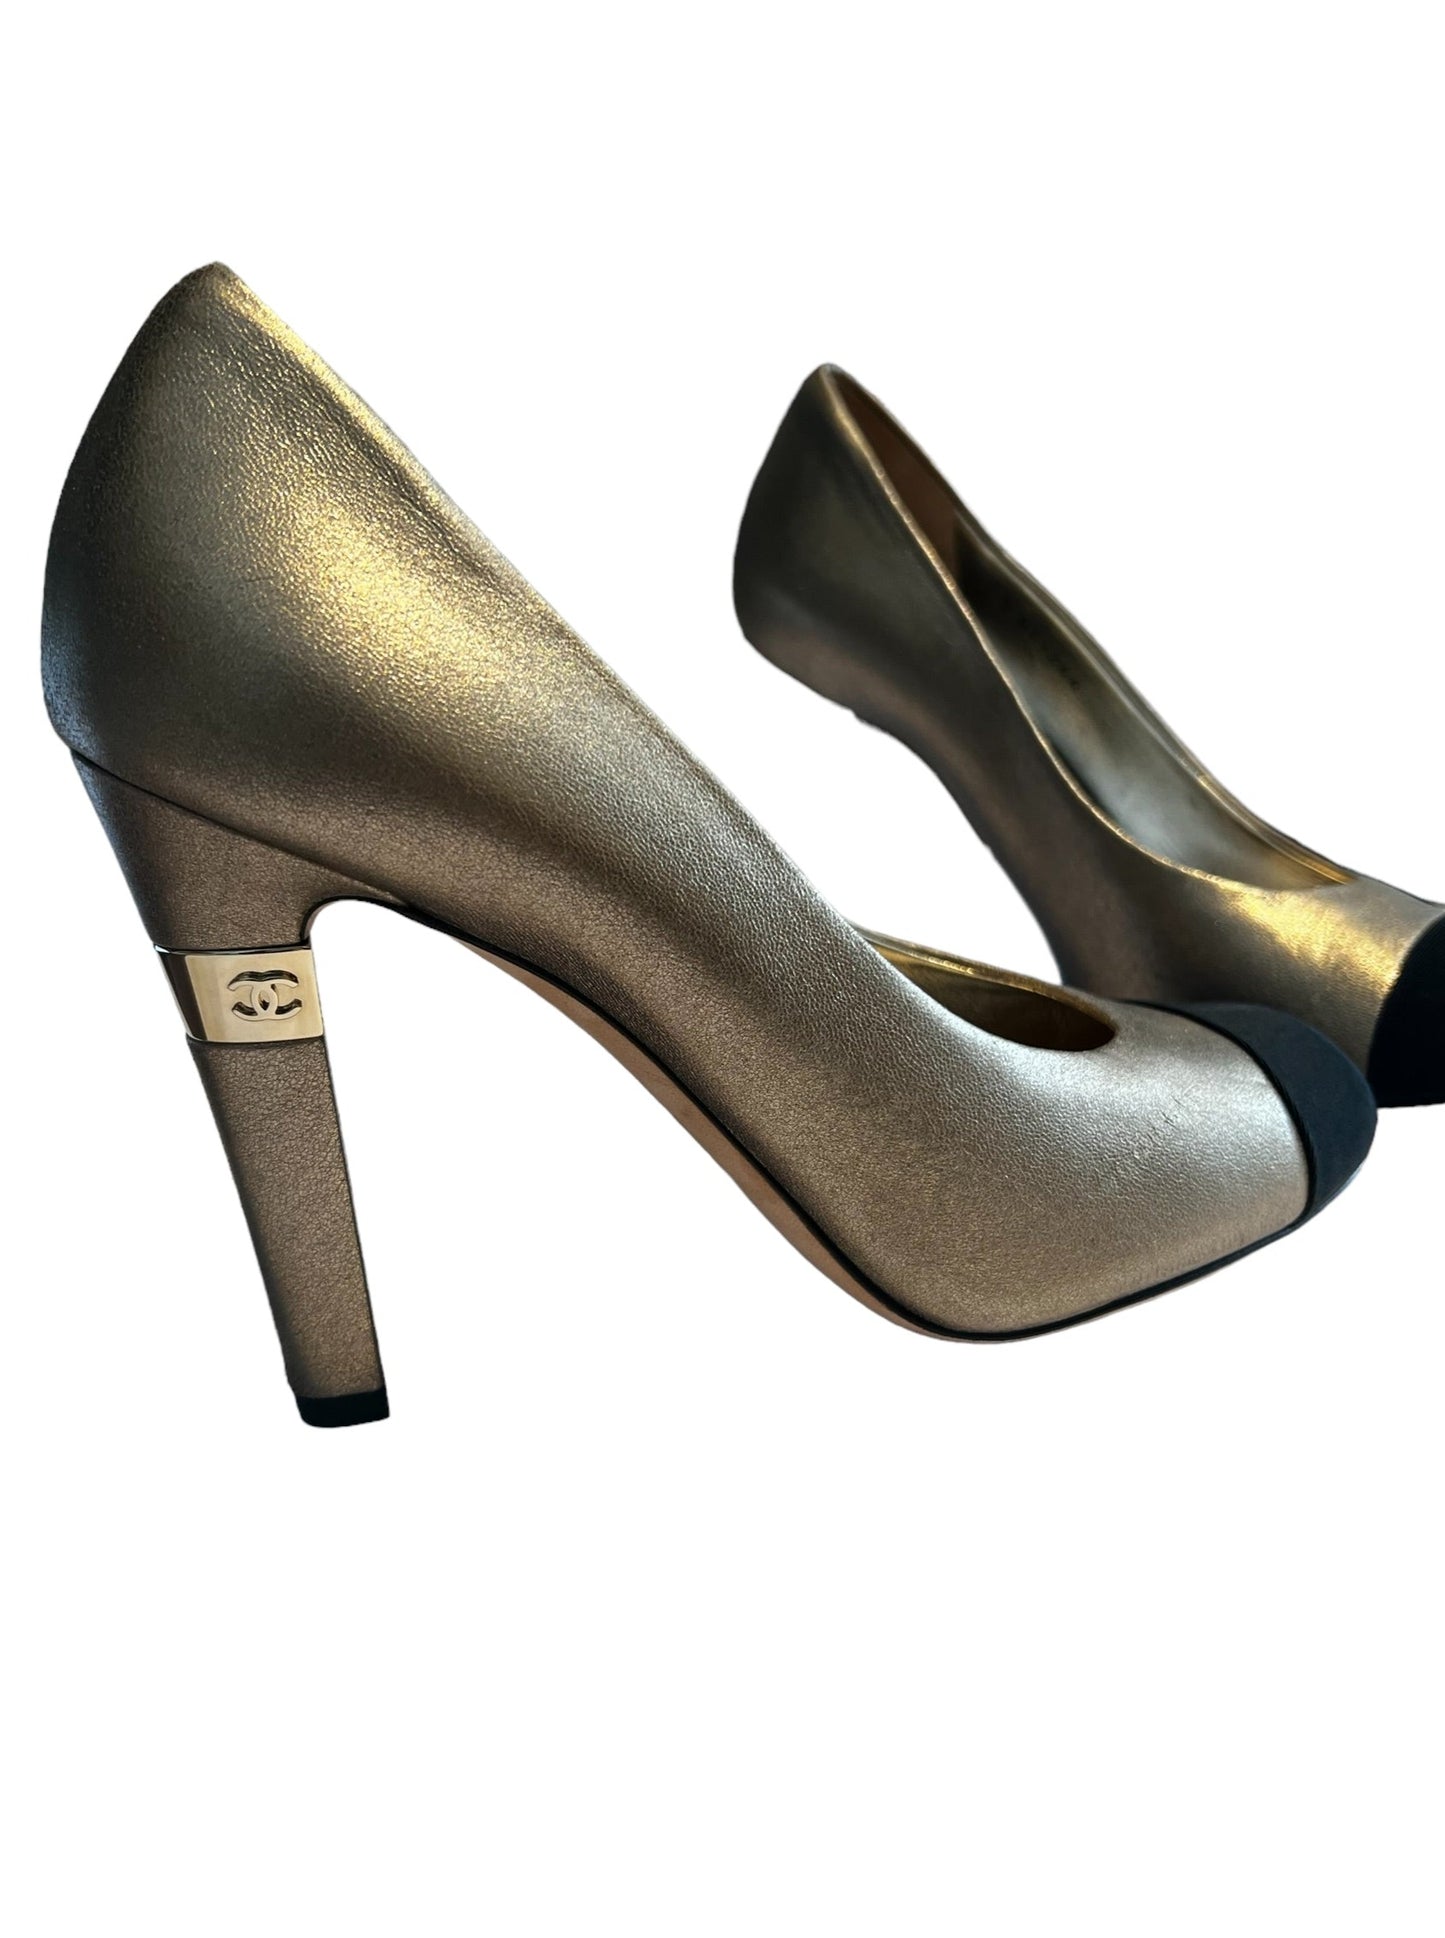 Chanel Cap toe heels with metallic gold leather and metal heel accent with cap toe shoe and  escarpins